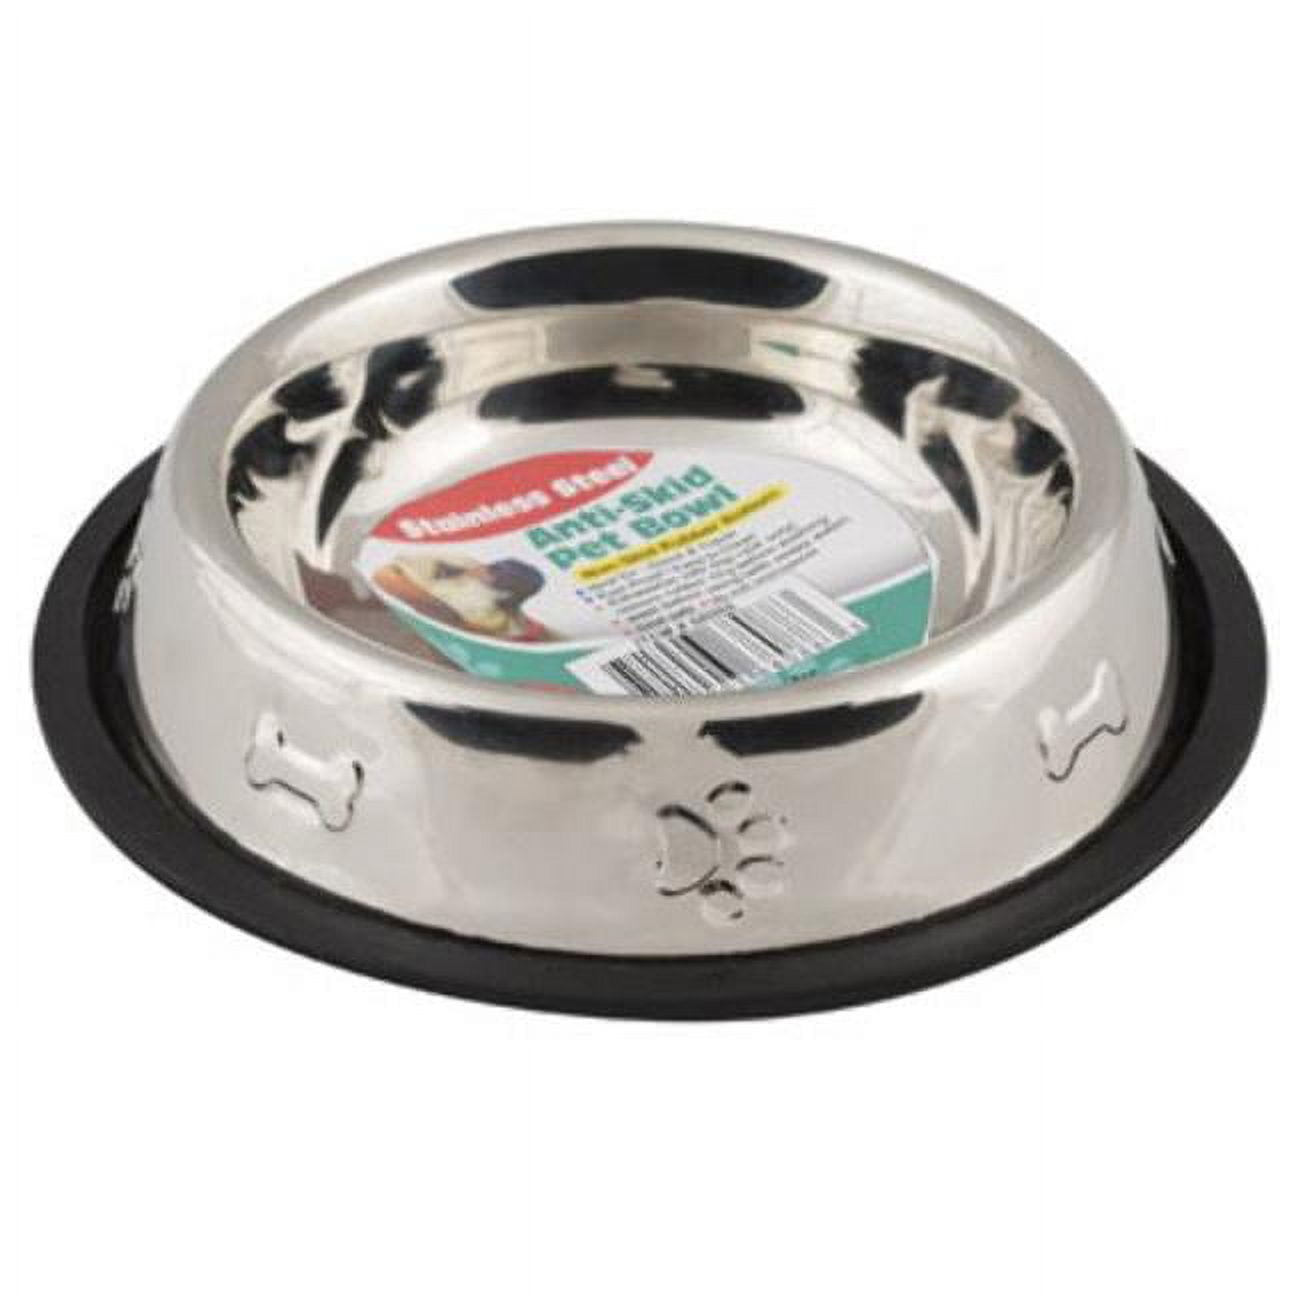 2324875 16 Oz Stainless Steel Pet Bowl, Silver - Case Of 36 - 36 Per Pack